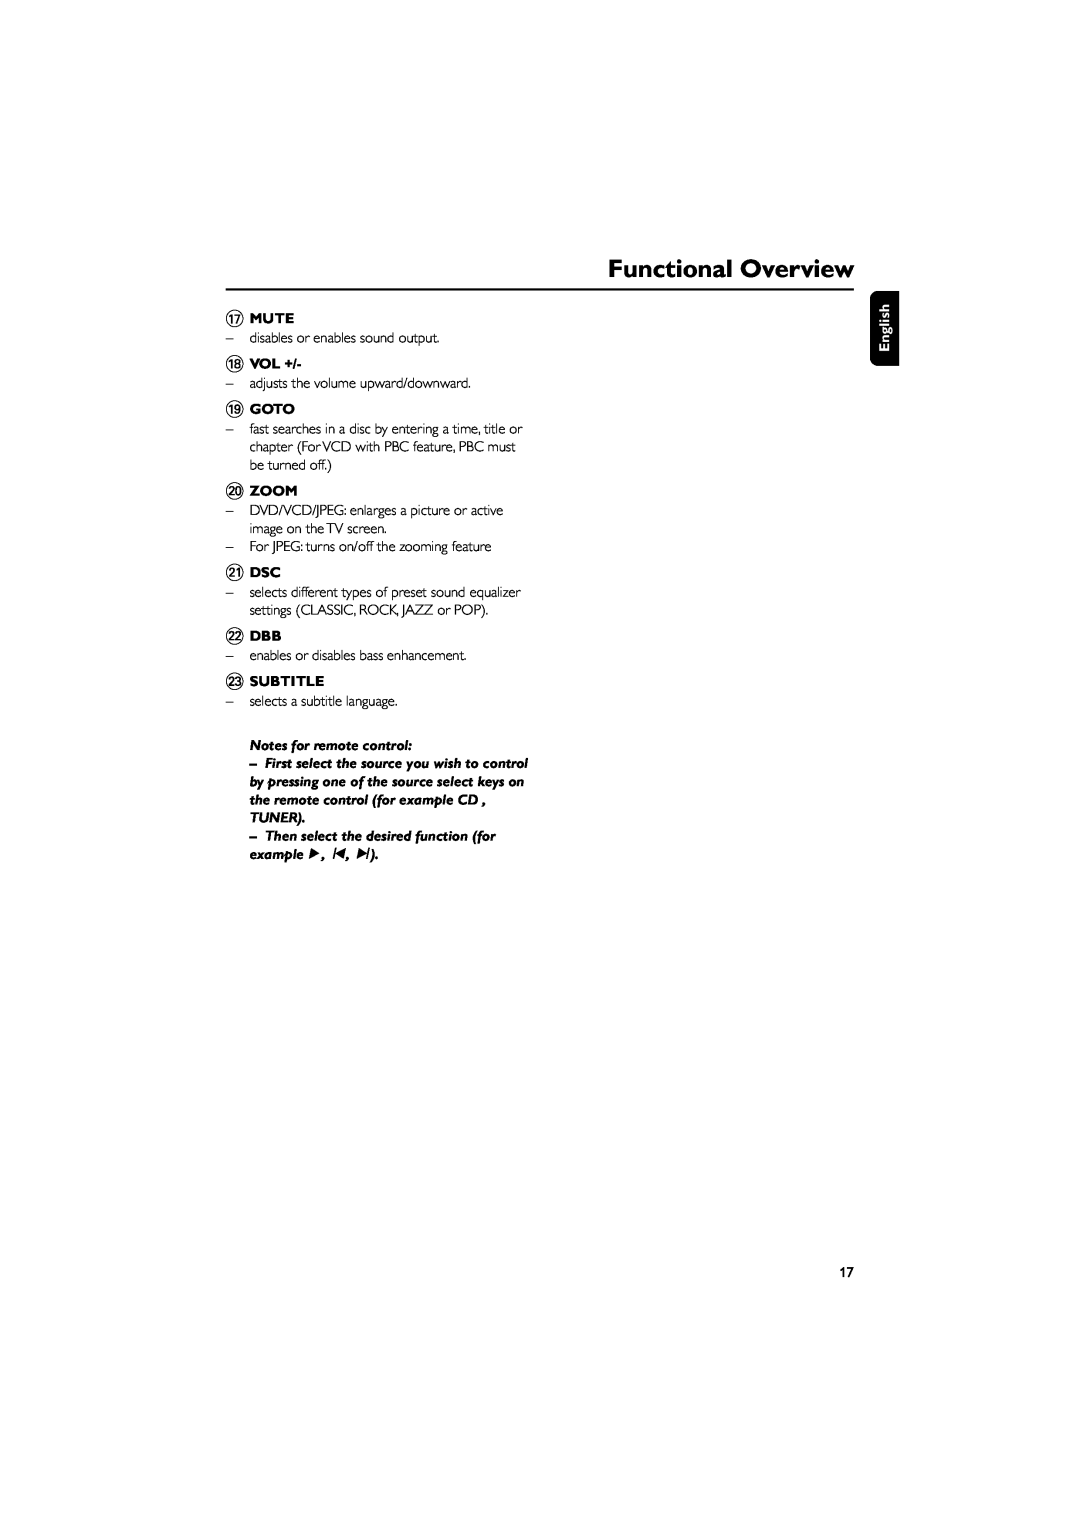 Philips MCD139 owner manual Functional Overview, Mute, Vol +, Goto, Zoom, ¡Dsc, £Subtitle, English 